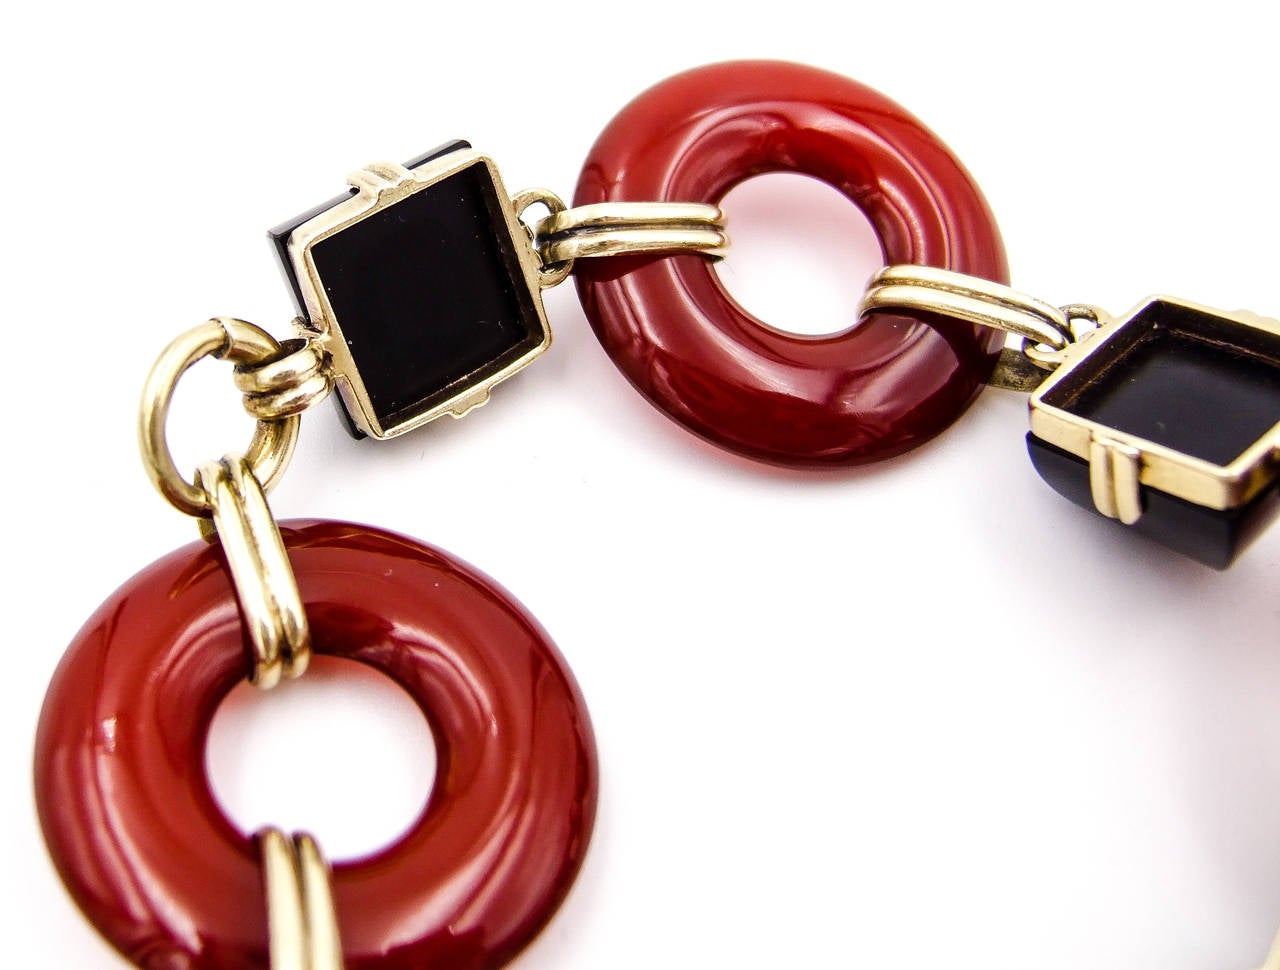 An interesting and wearable bracelet from the late 1920s.  Umber colored donuts of carnelian alternate with perky sugarloaf (domed pyramids) black onyx  elements.   The color contrast is bold and very typical of the color contrasts seen in the late